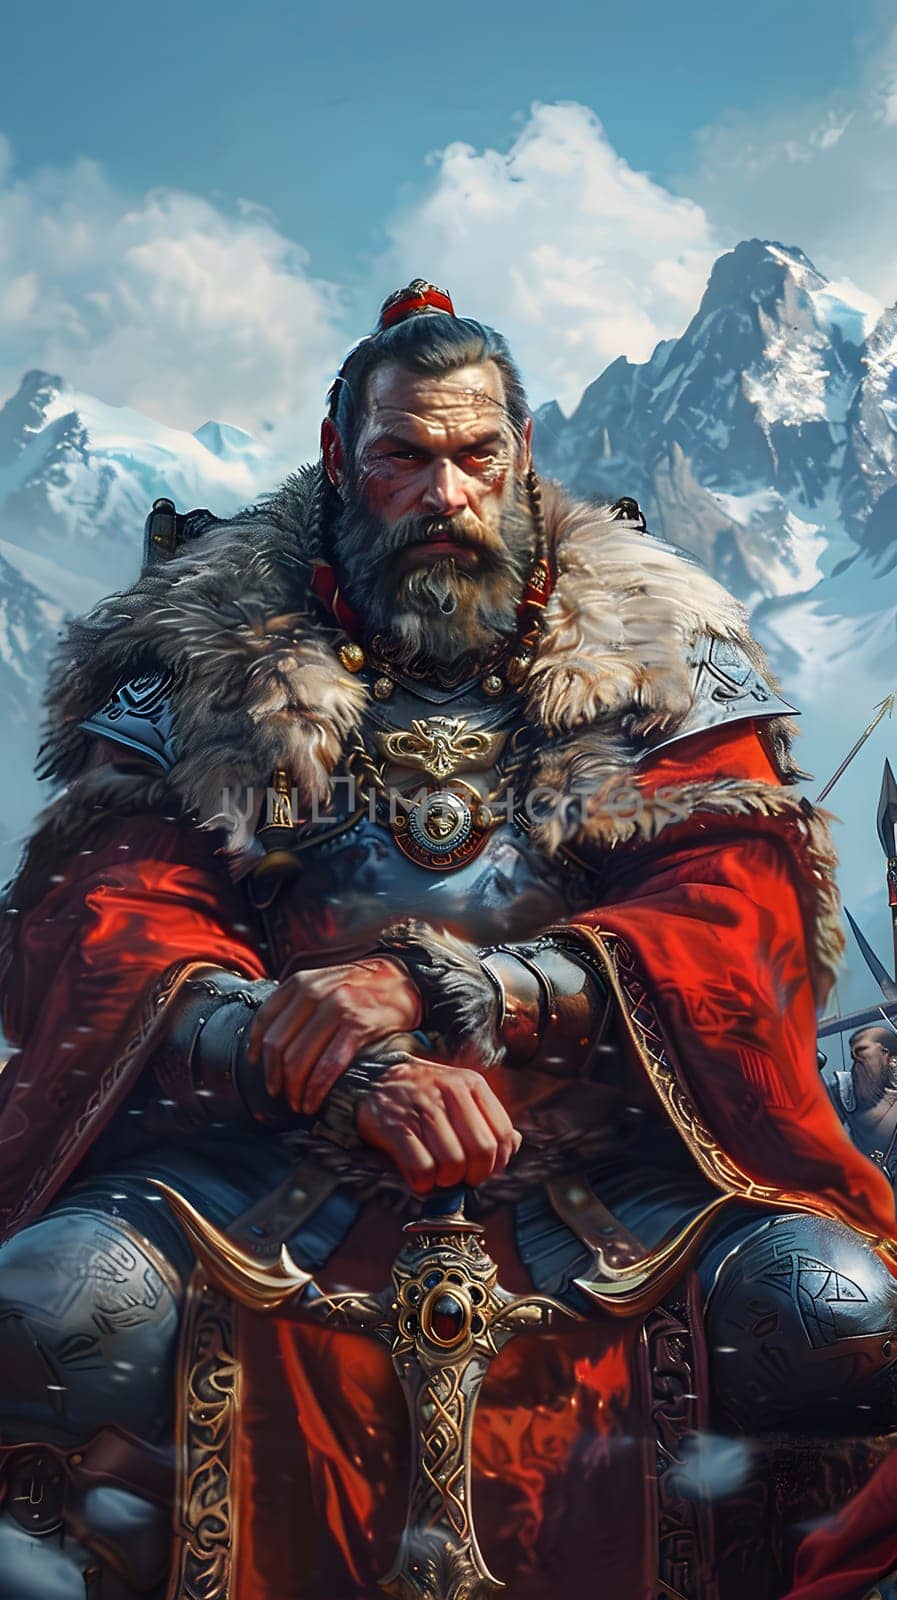 A bearded man in armour sits on a throne against a snowy mountain backdrop. His cape billows in the wind under a cloudy sky, creating a majestic landscape straight out of mythology